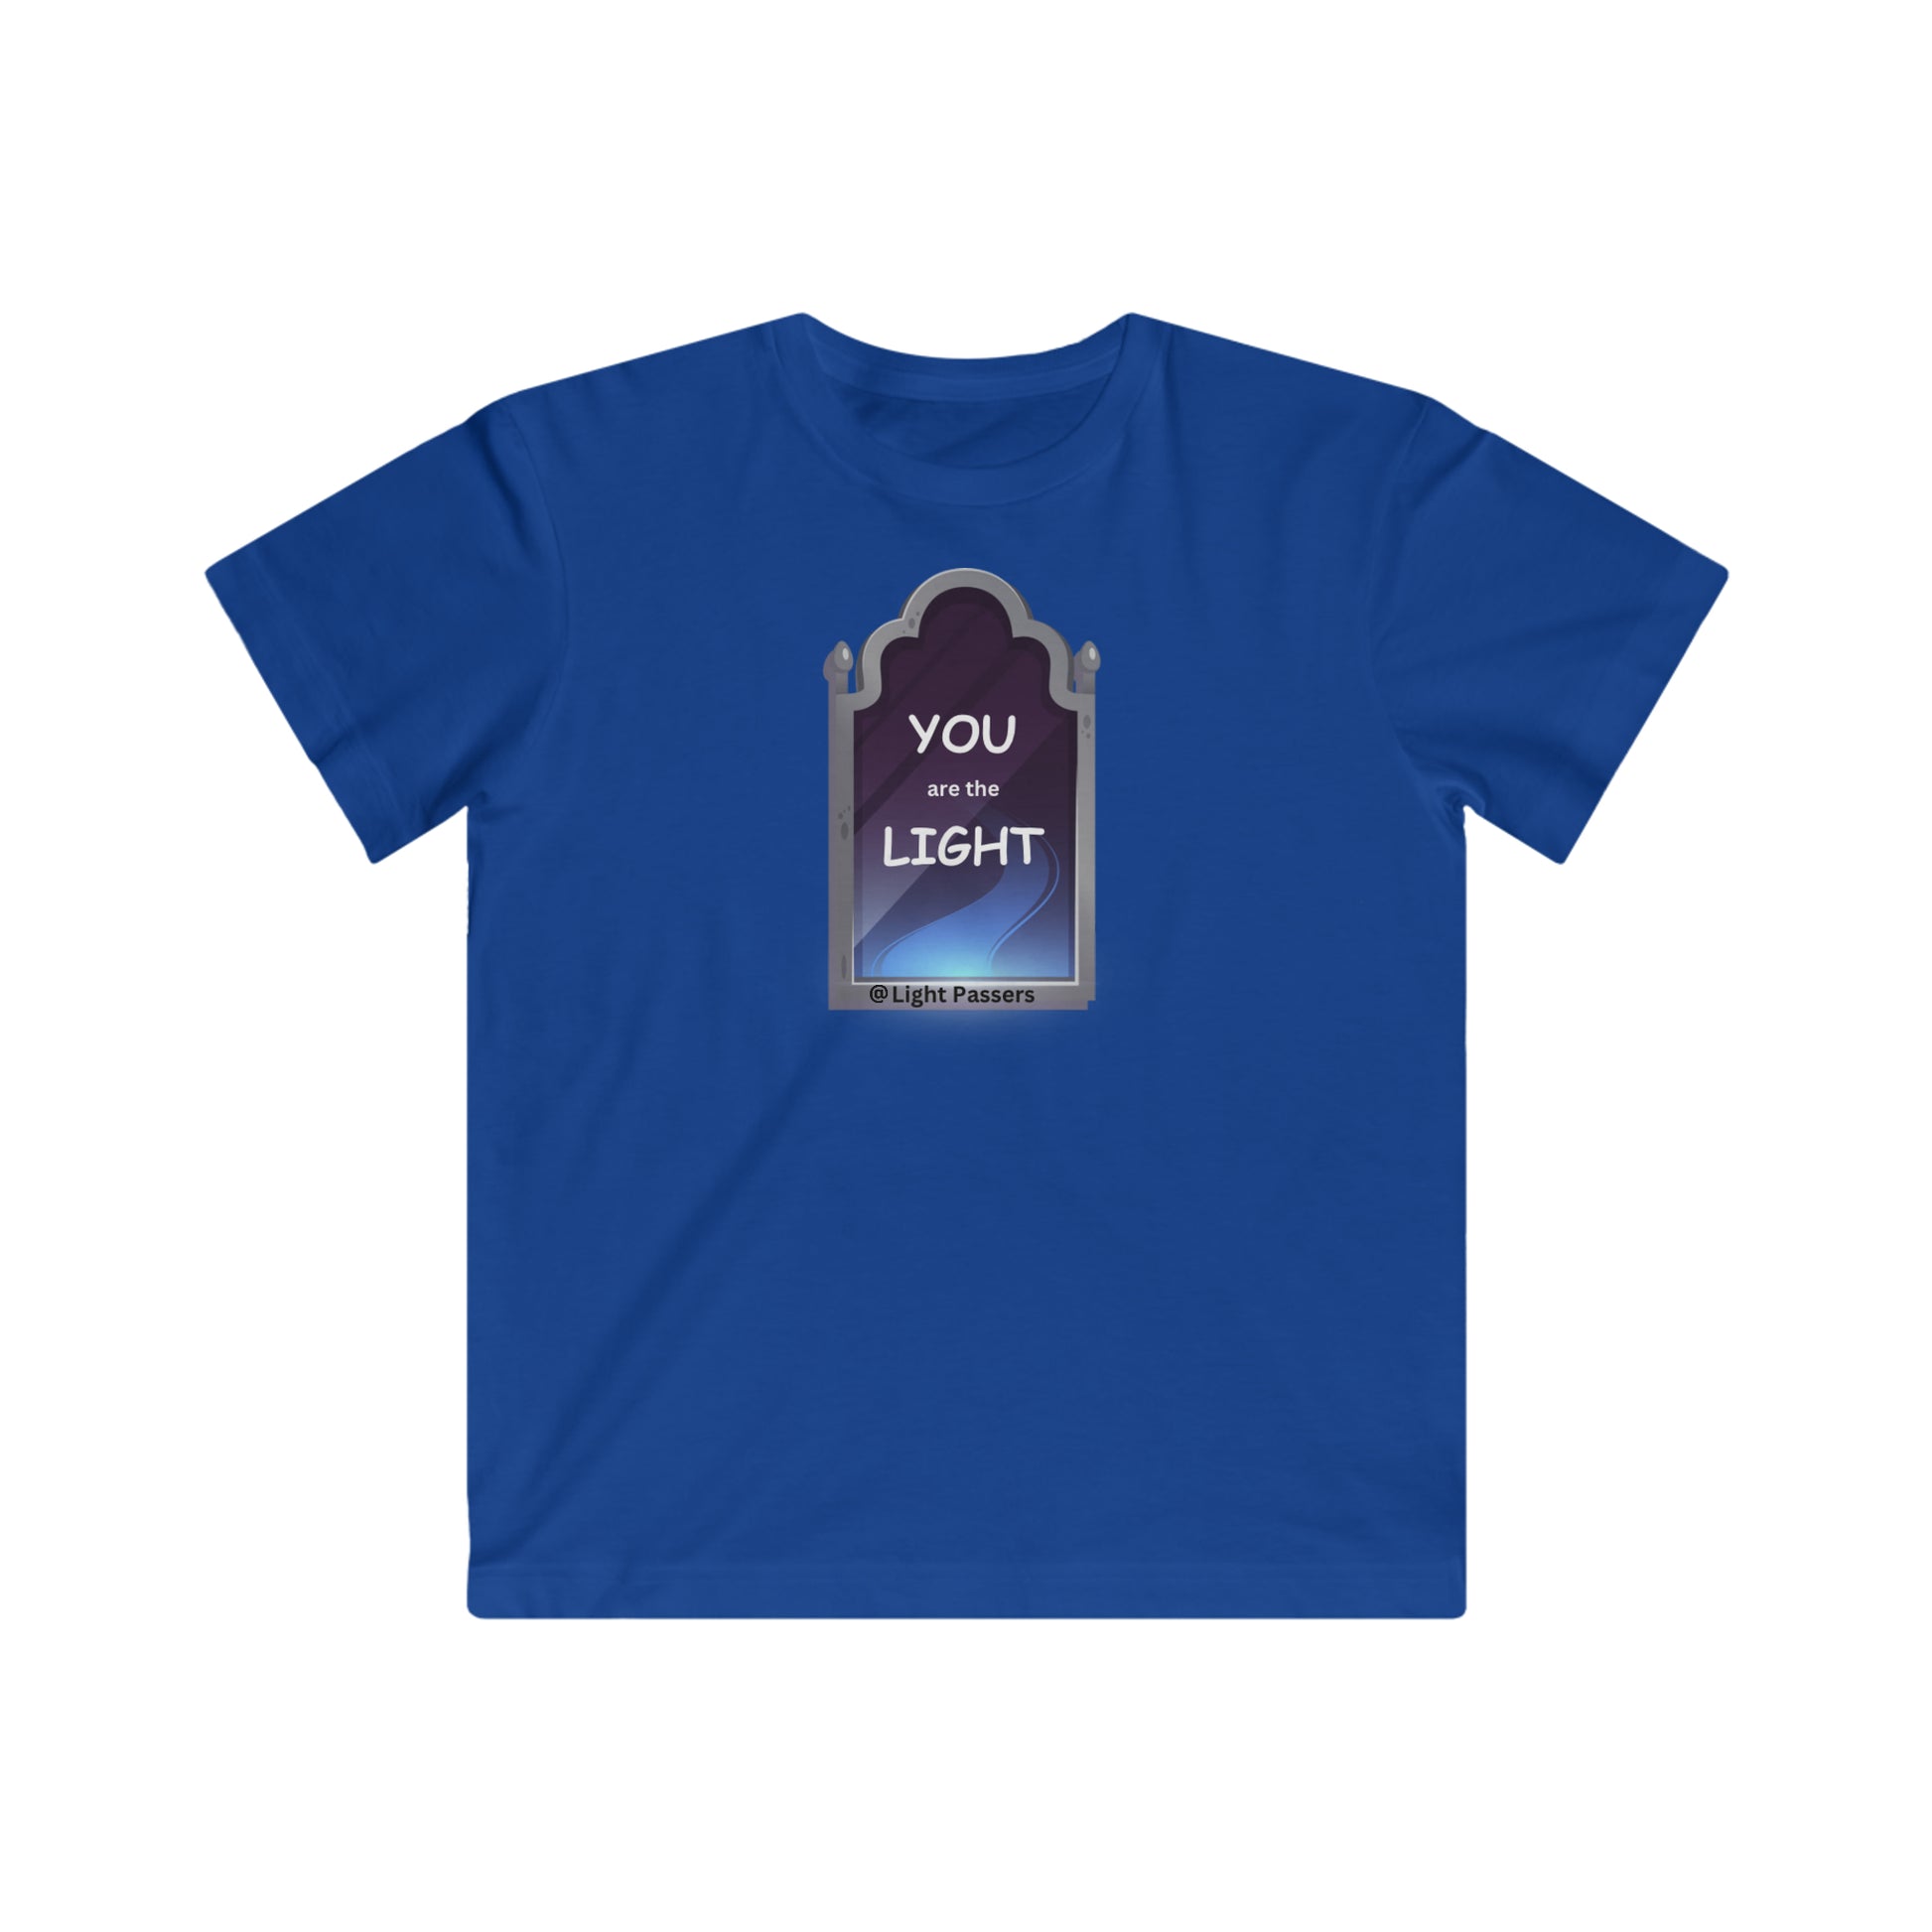 Youth T-shirt featuring a light design on blue fabric. Soft jersey material, tear-away label, and regular fit for comfort. 100% combed ringspun cotton. Ideal for a playful and stylish look.